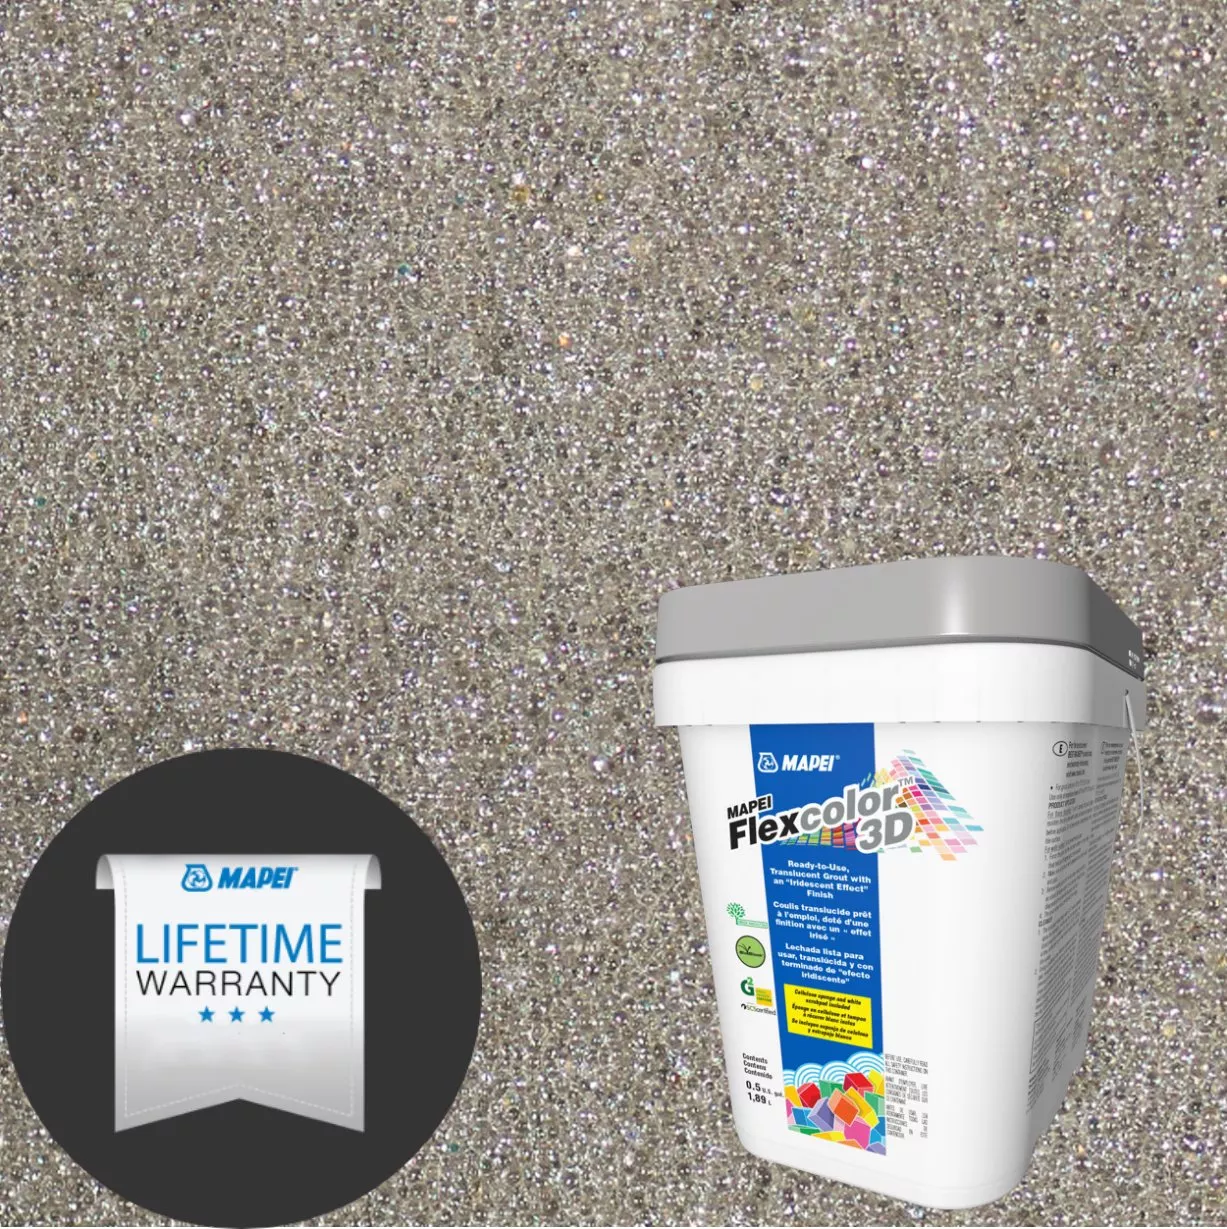 Mapei 204 Pure Steel FlexColor 3D Pre-Mixed Grout